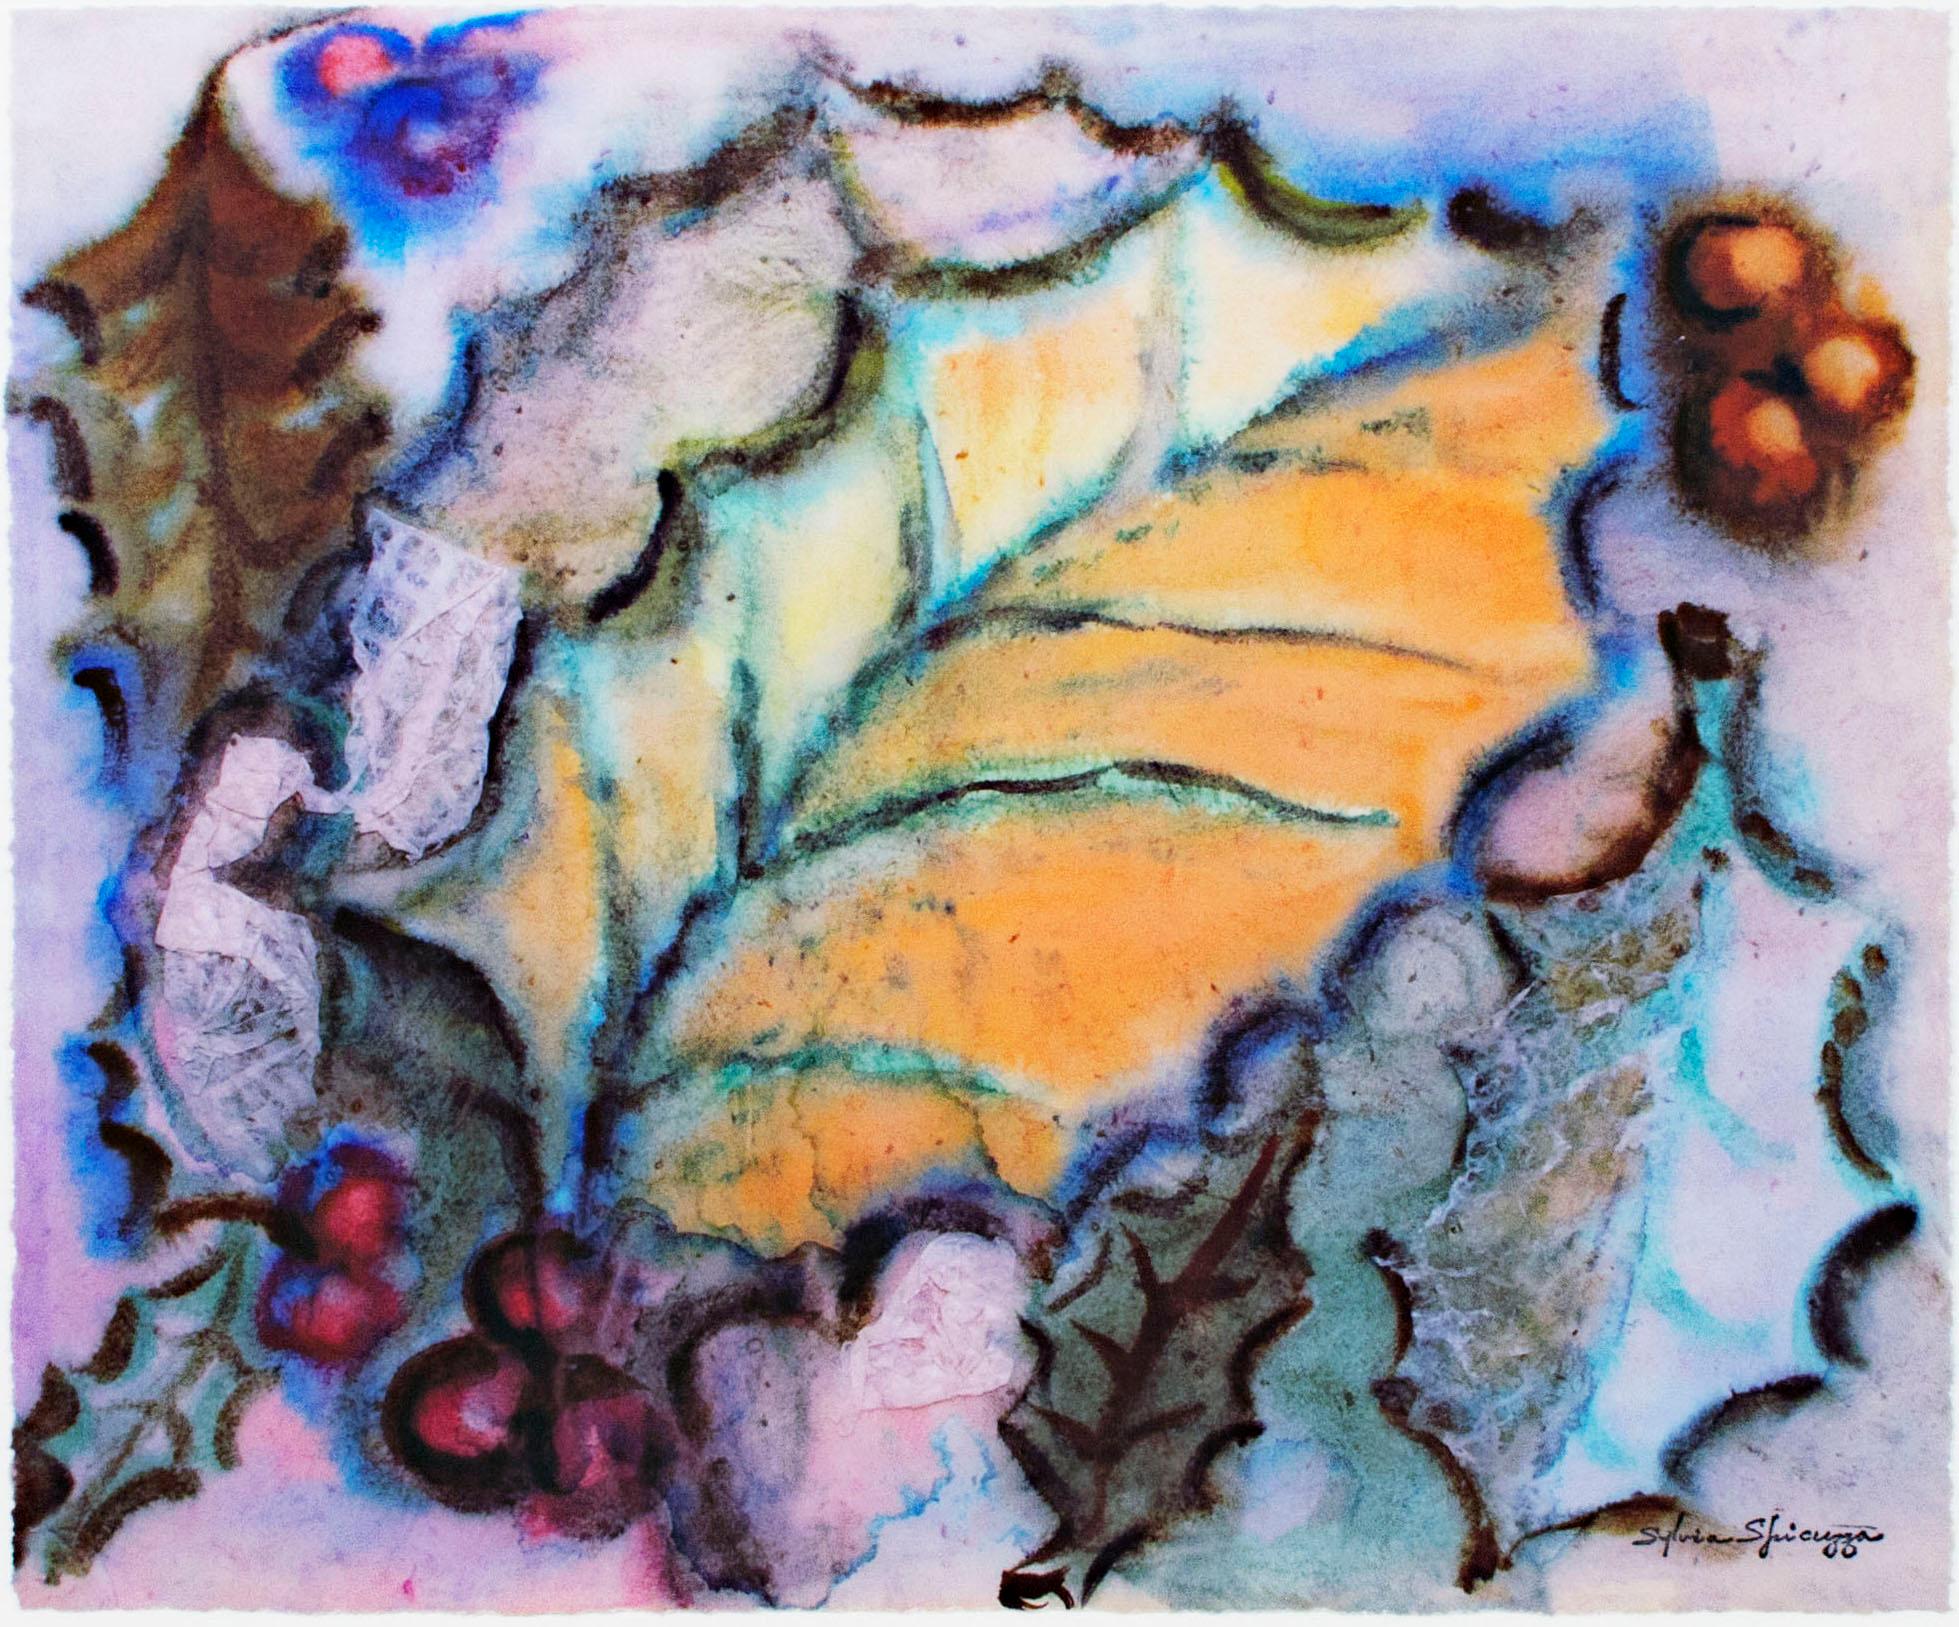 "Leaves & Berries" giclée print after ca. 1950s original watercolor and collage